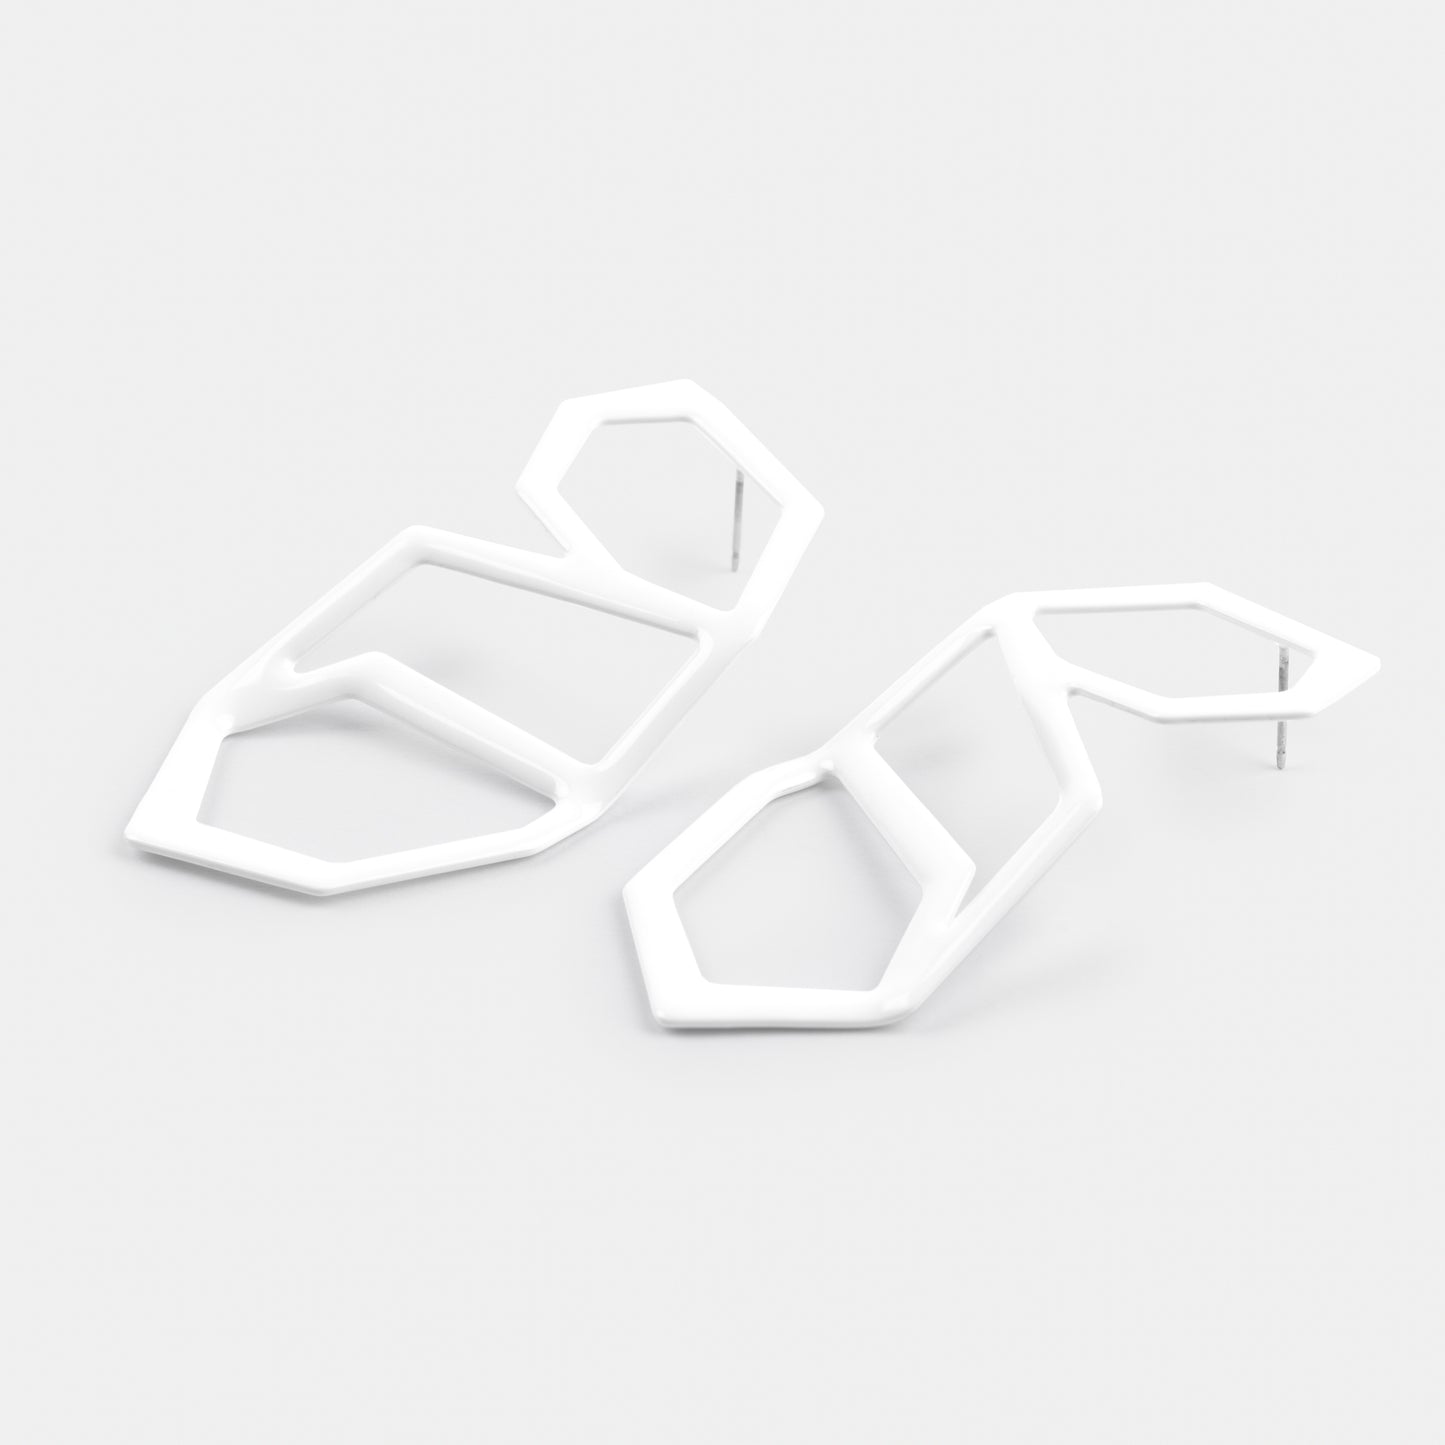 Supported Flight Earrings in Cloud White